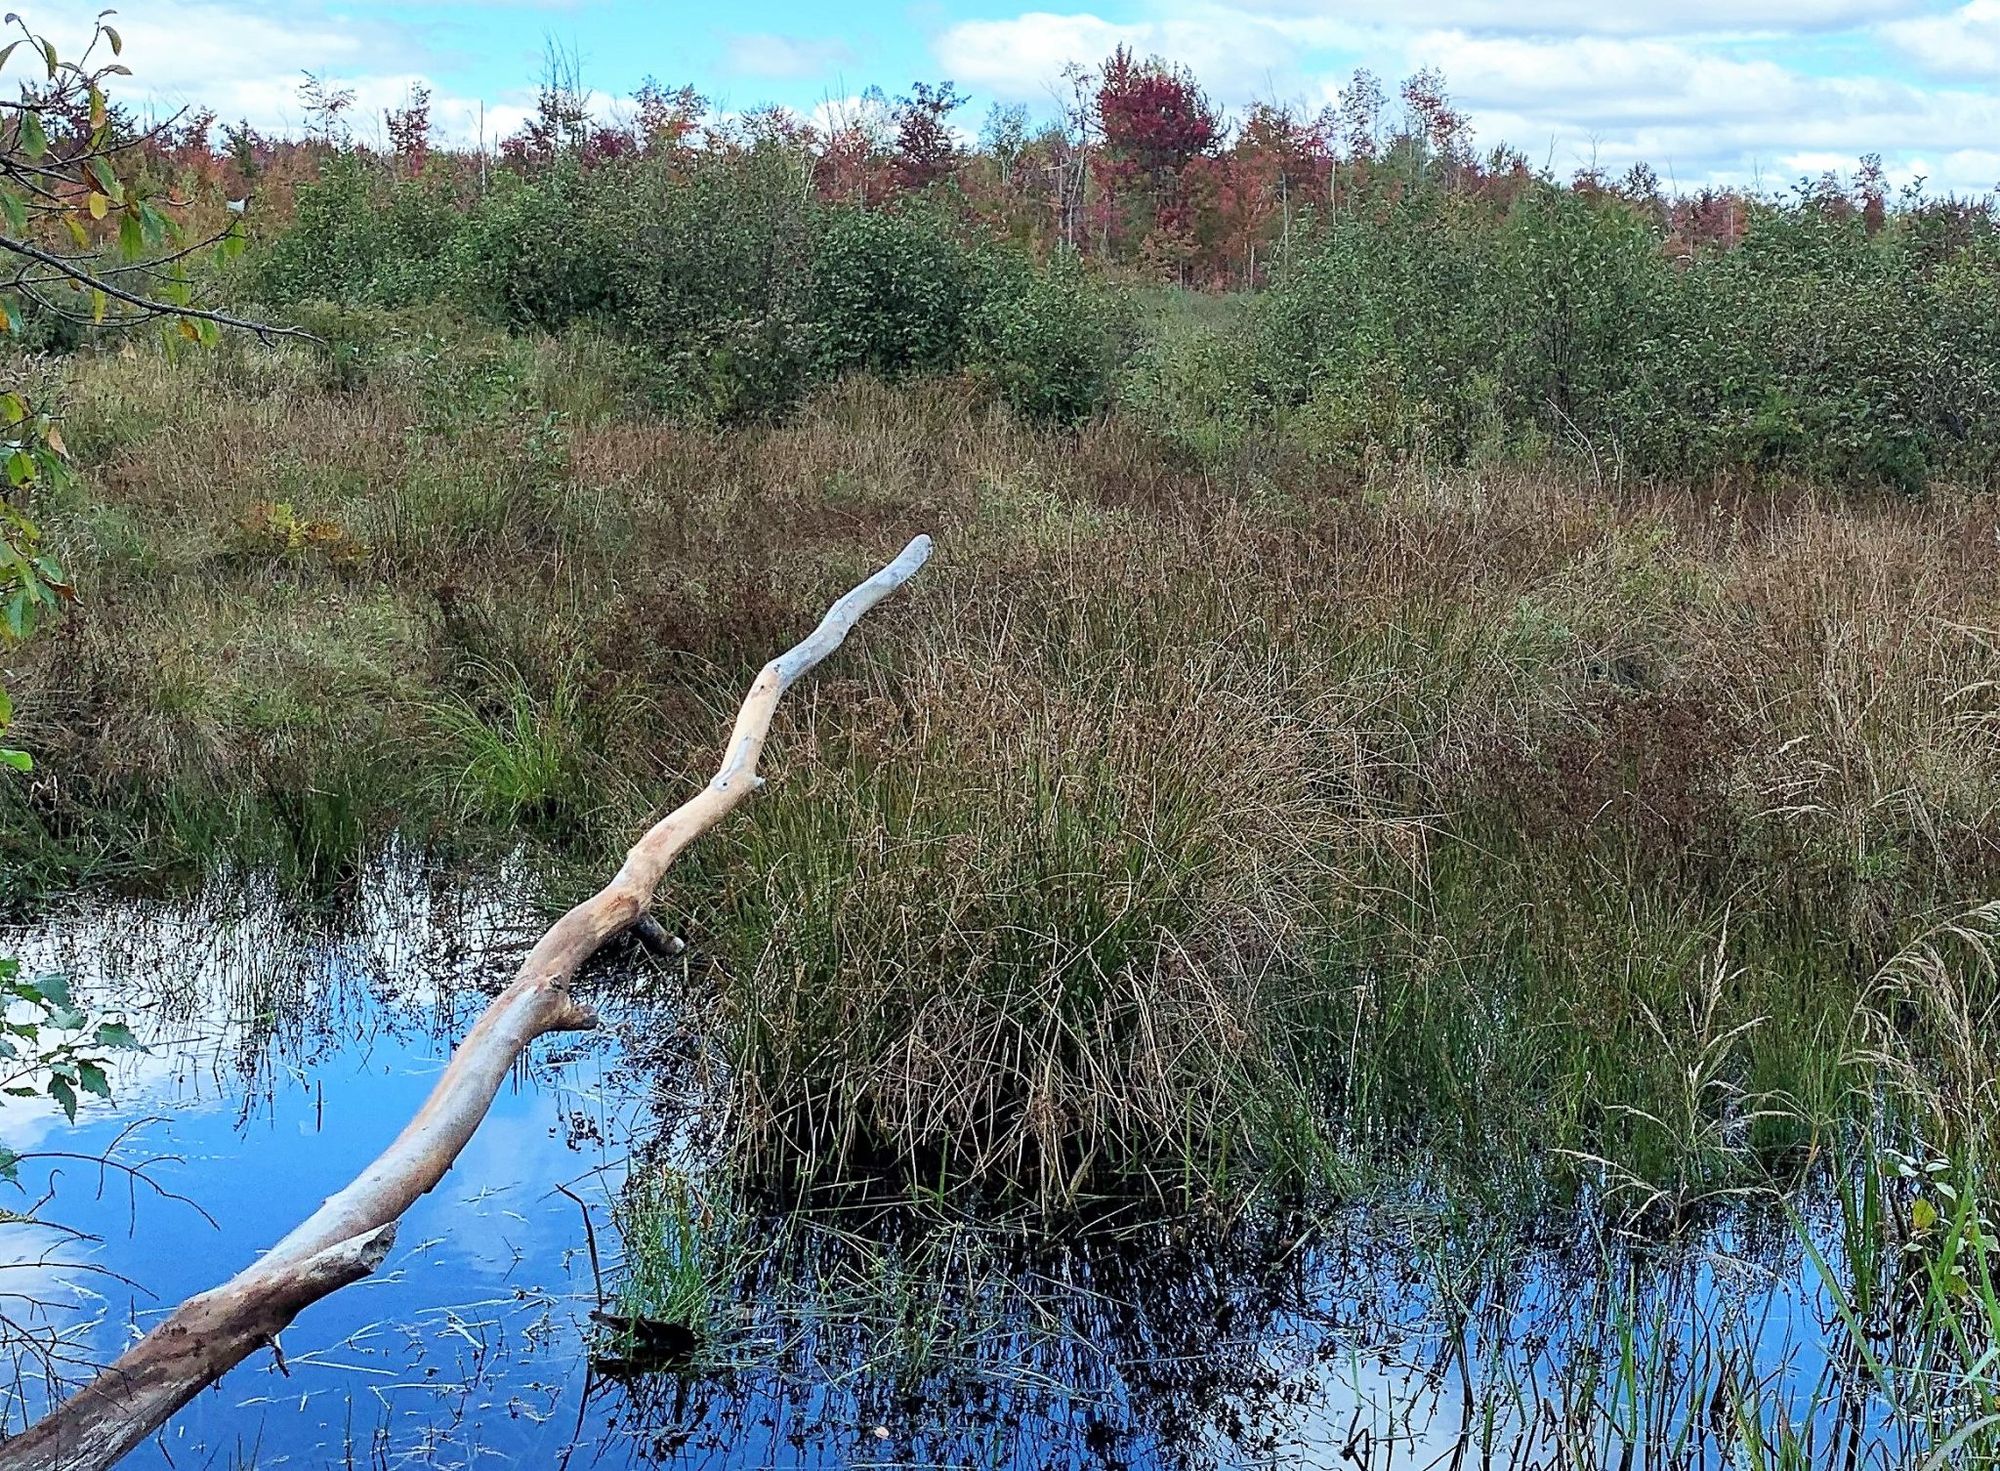 SNC partners with Ducks Unlimited Canada to restore wetlands cross Eastern Ontario